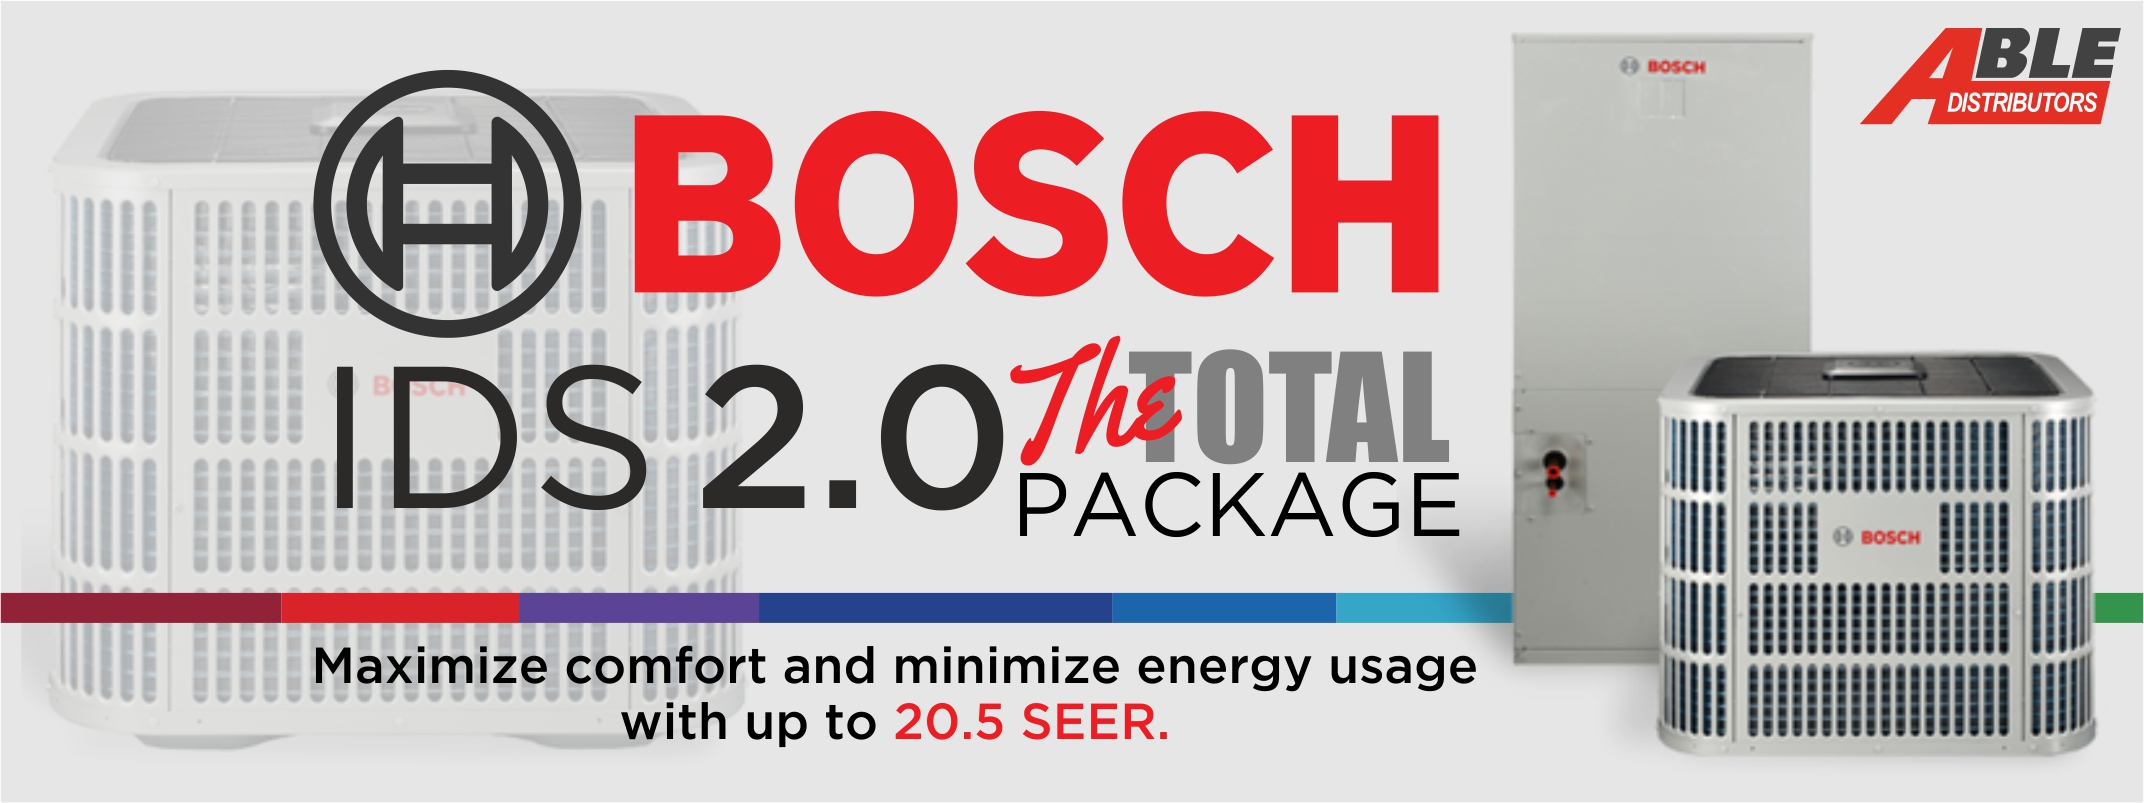 bosch-ids-2-0-the-total-package-able-distributors